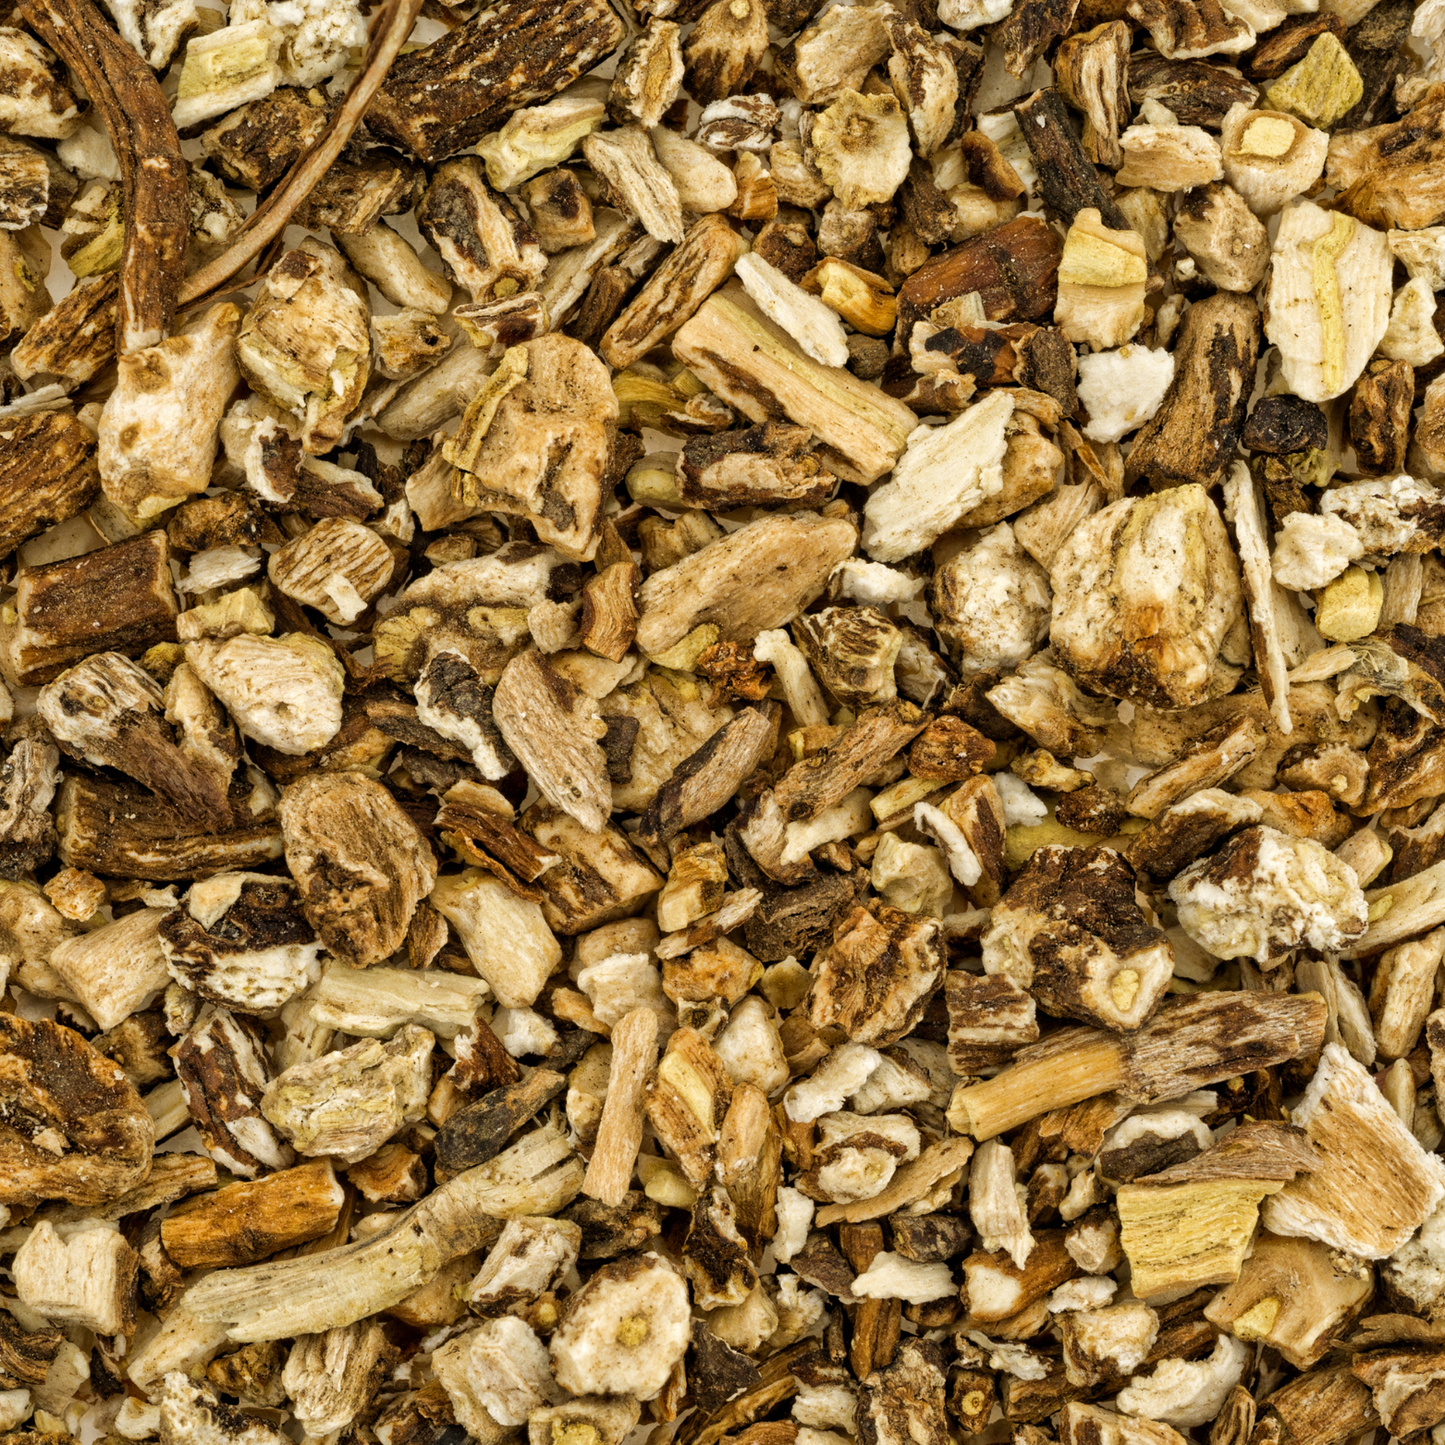 Dandelion Root, Pieces of Root, Dried Herbs, Food Grade Herbs, Herbs and Spices, Loose Leaf Herbs